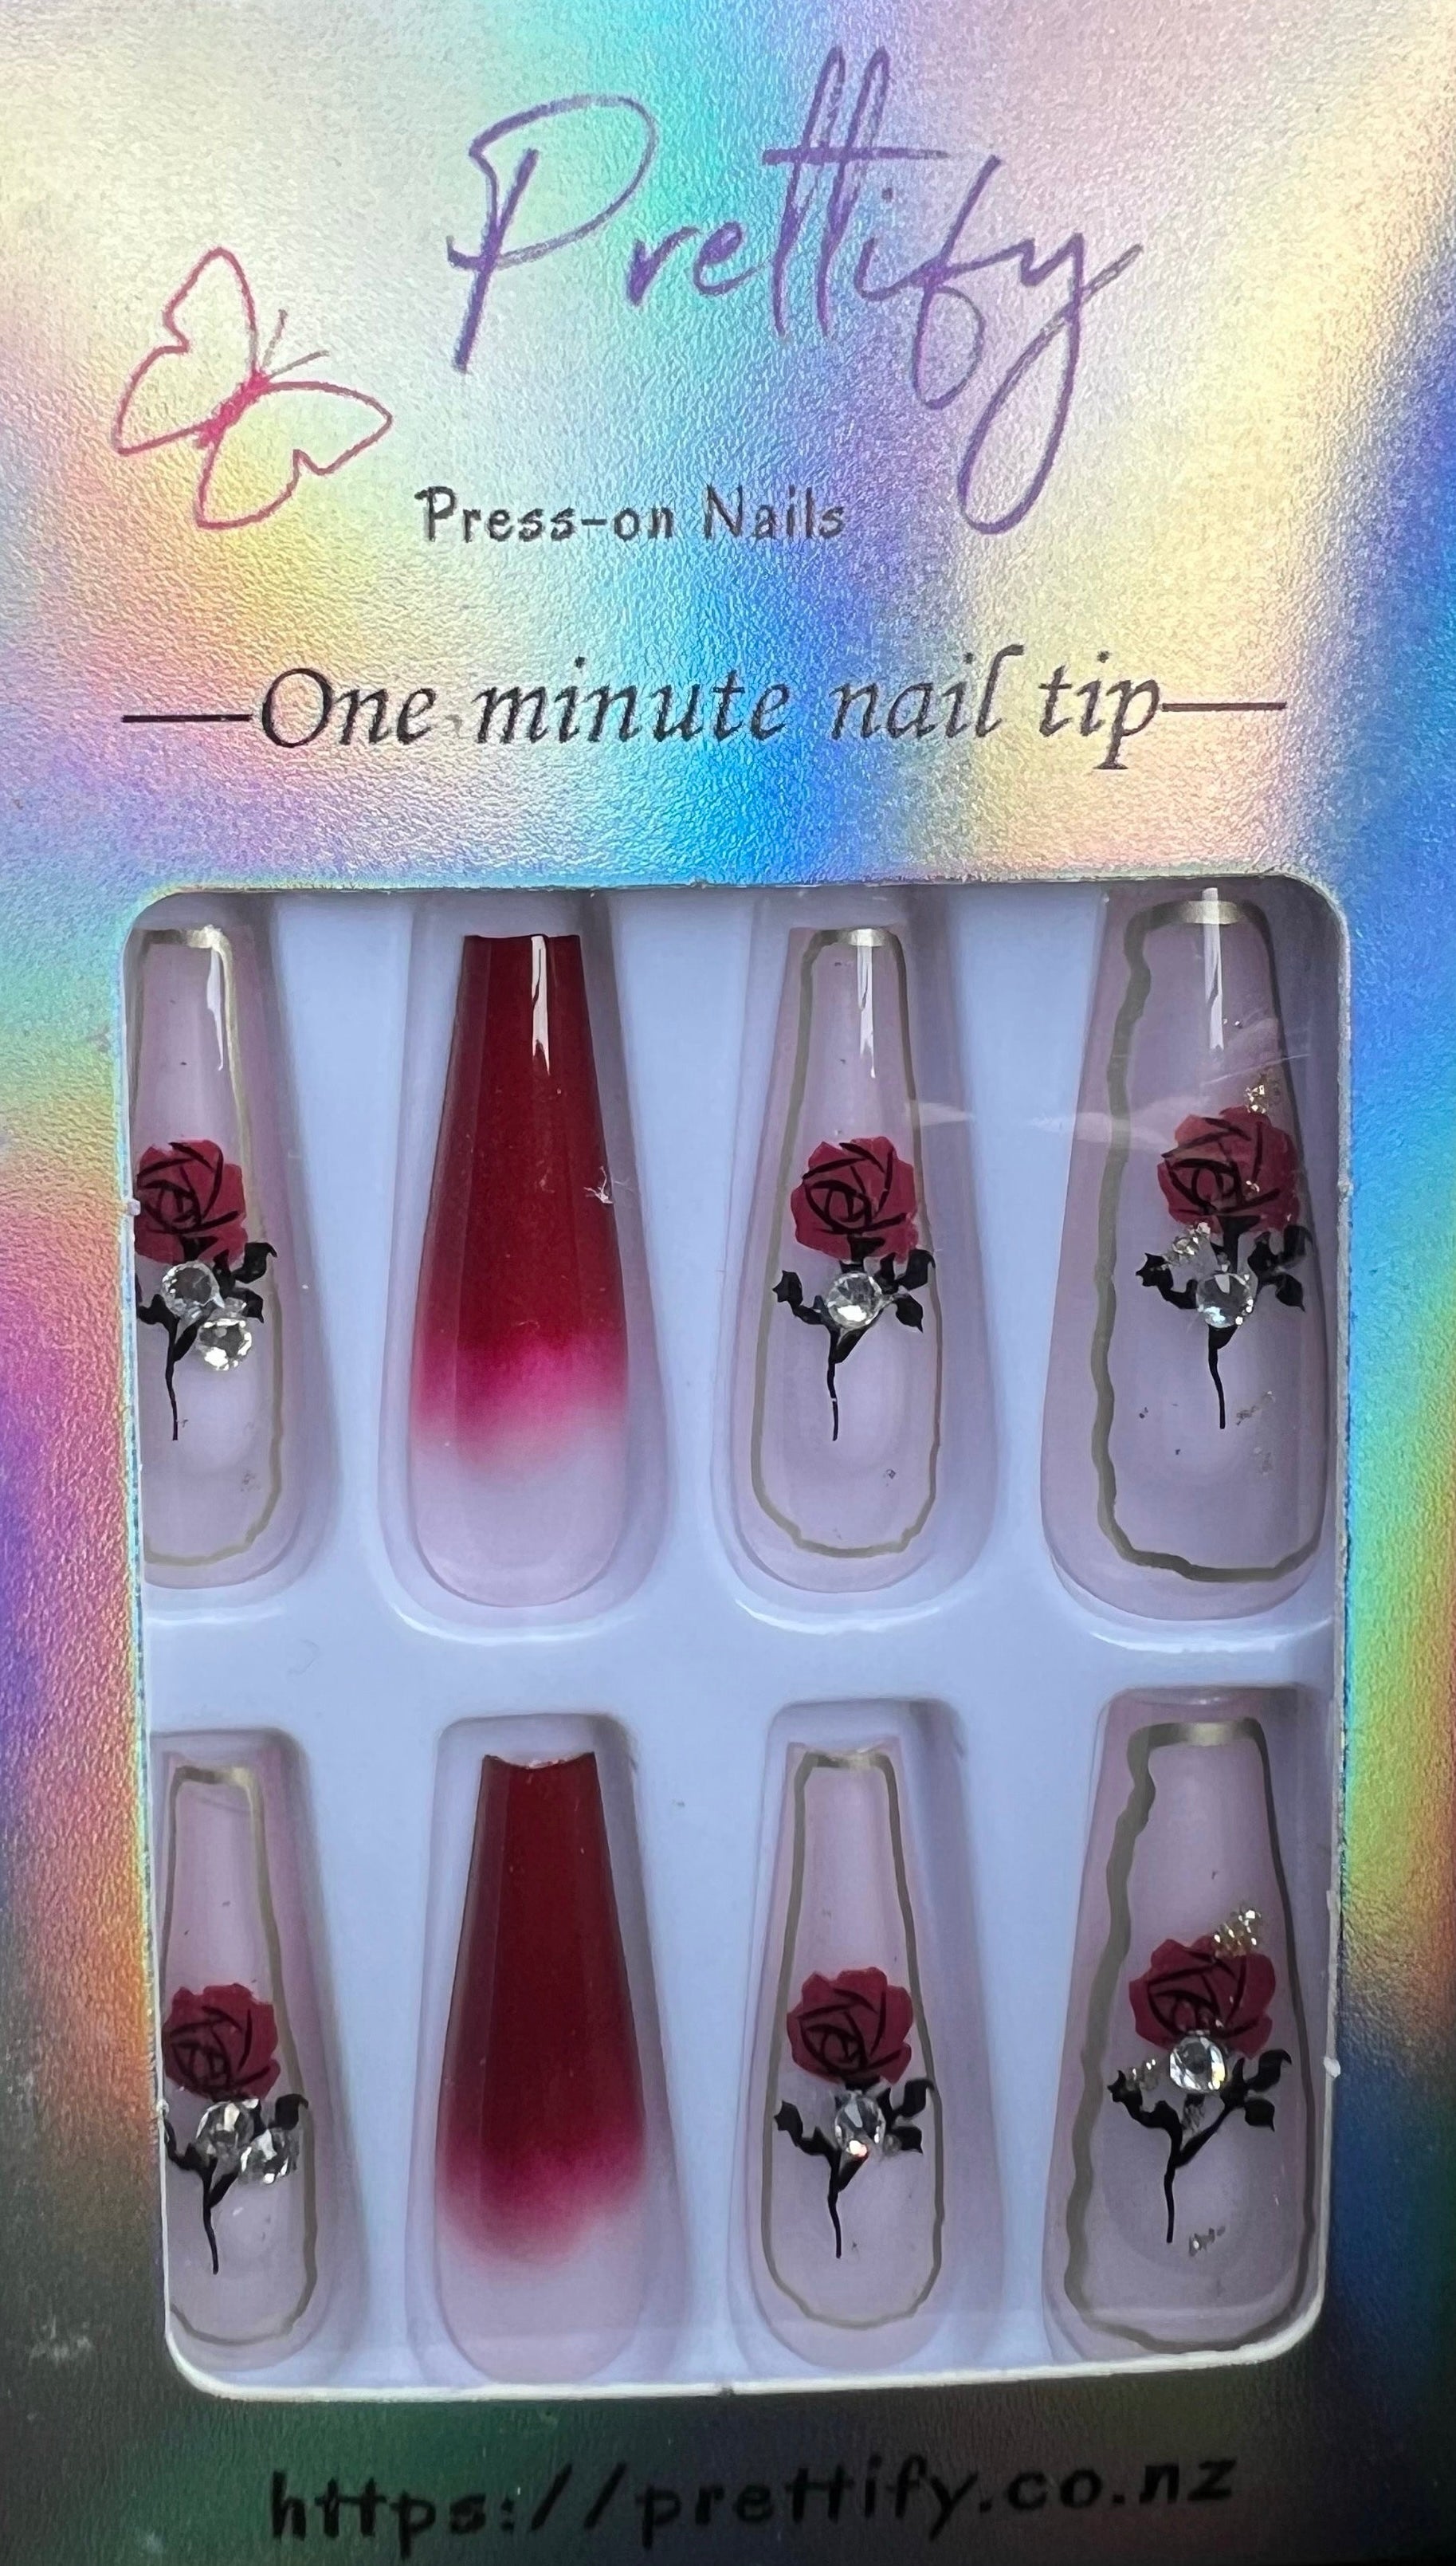 Long Coffin Press on Nails. Red Ombre with Gold Tips, Rose & Jewel. Easy and quick to apply. Great for those special occasions, parties or add an edge to any outfit. Gorgeous, flattering and you can re-use them again and again.